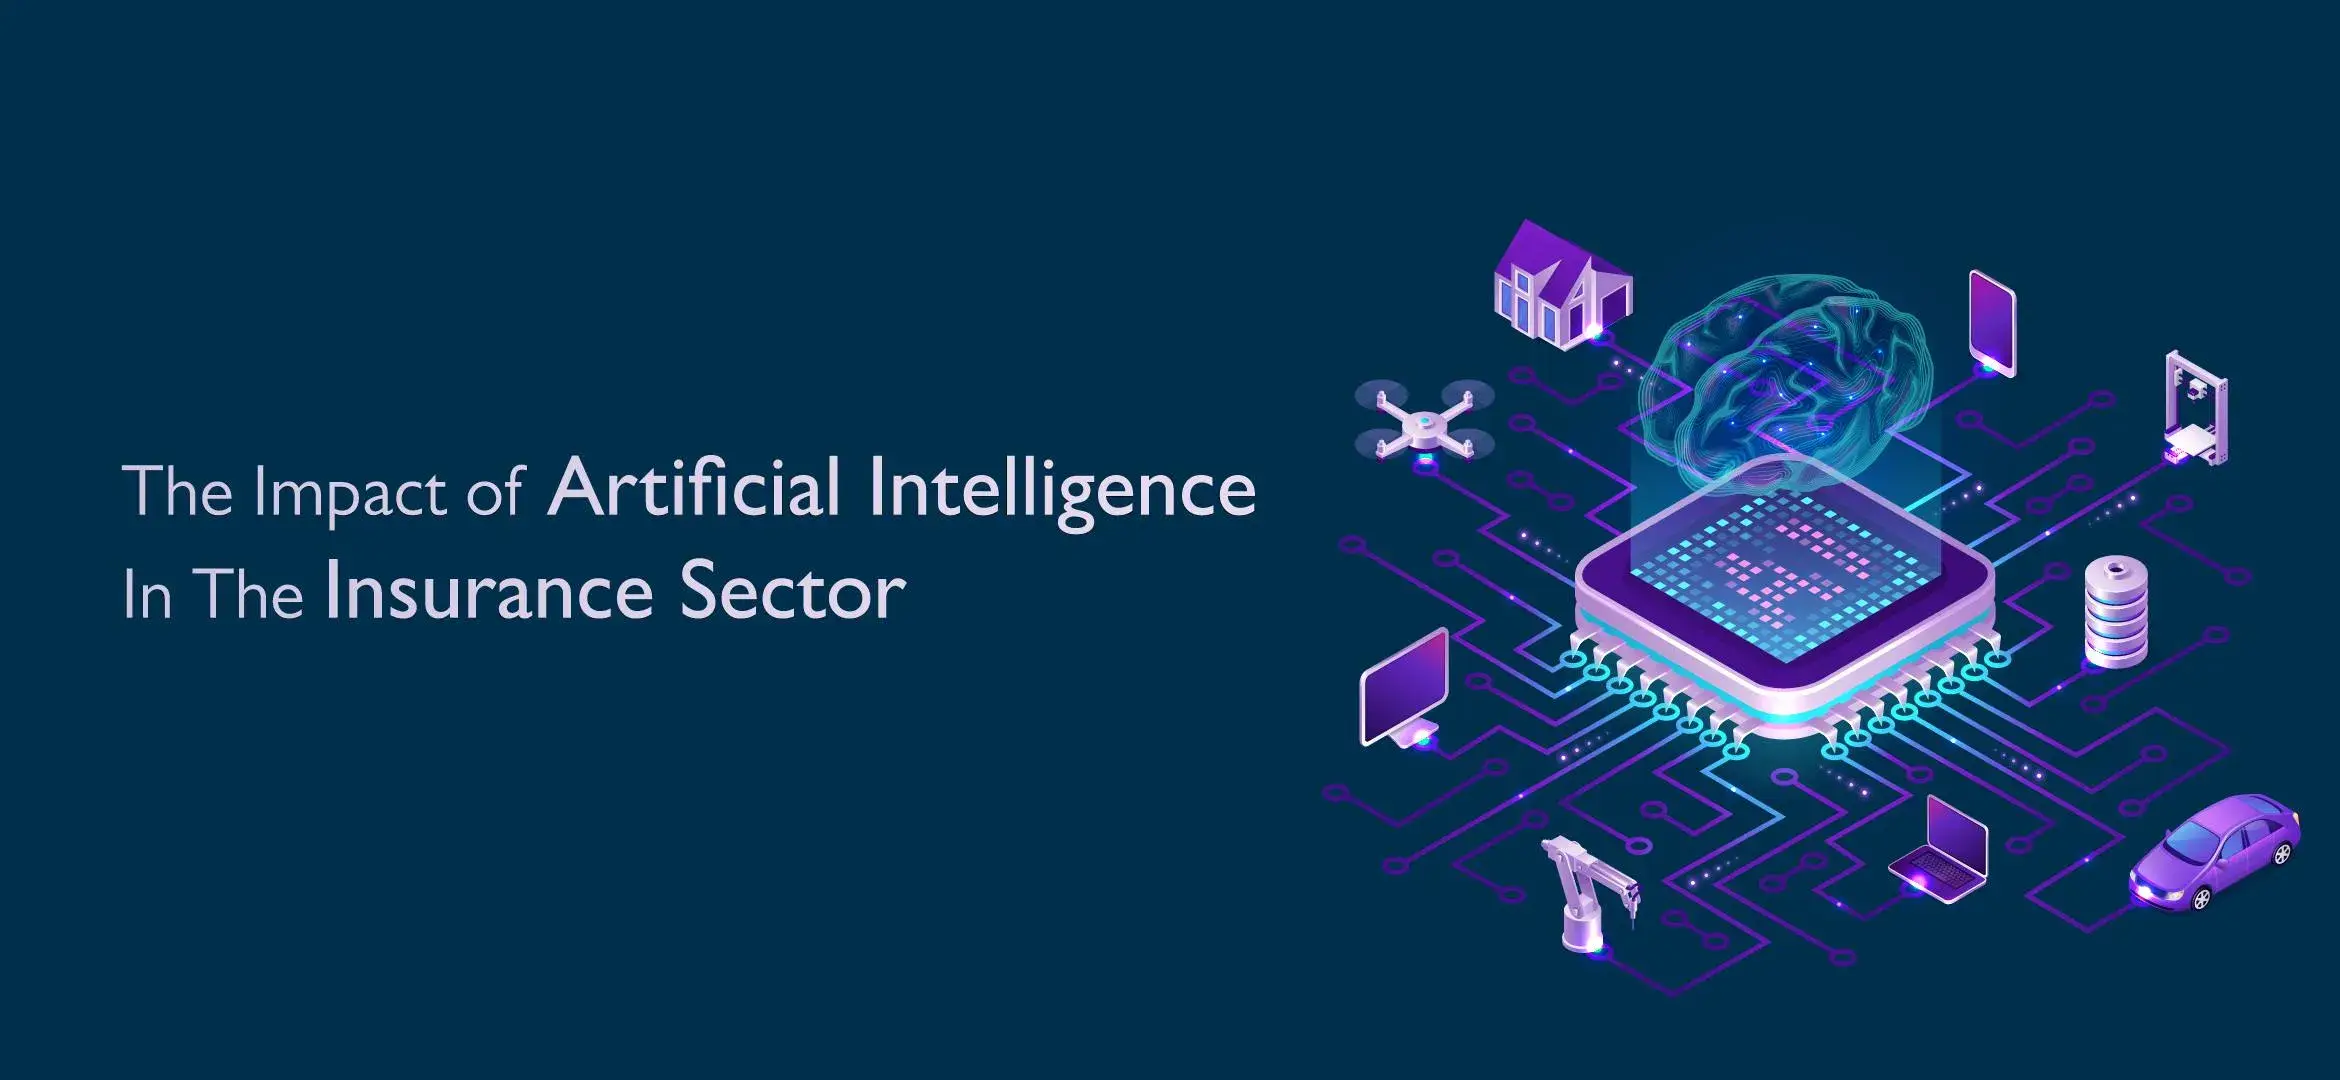 1712233459The Impact of Artificial Intelligence In The Insurance Sector.webp